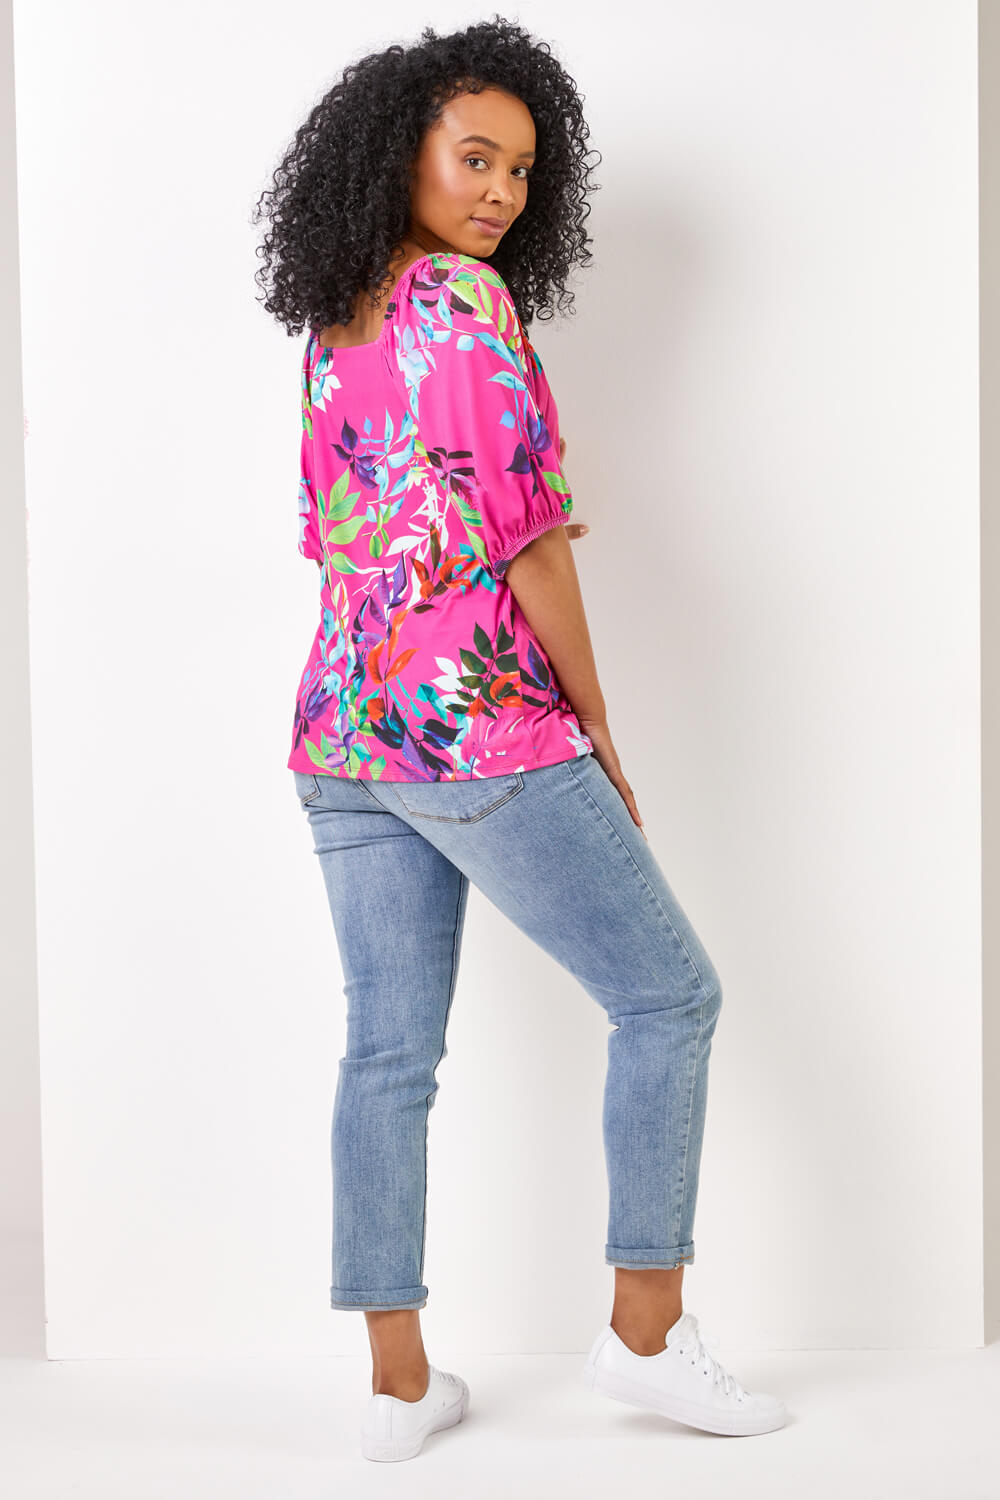 PINK Petite Tropical Print Square Neck Top, Image 3 of 5